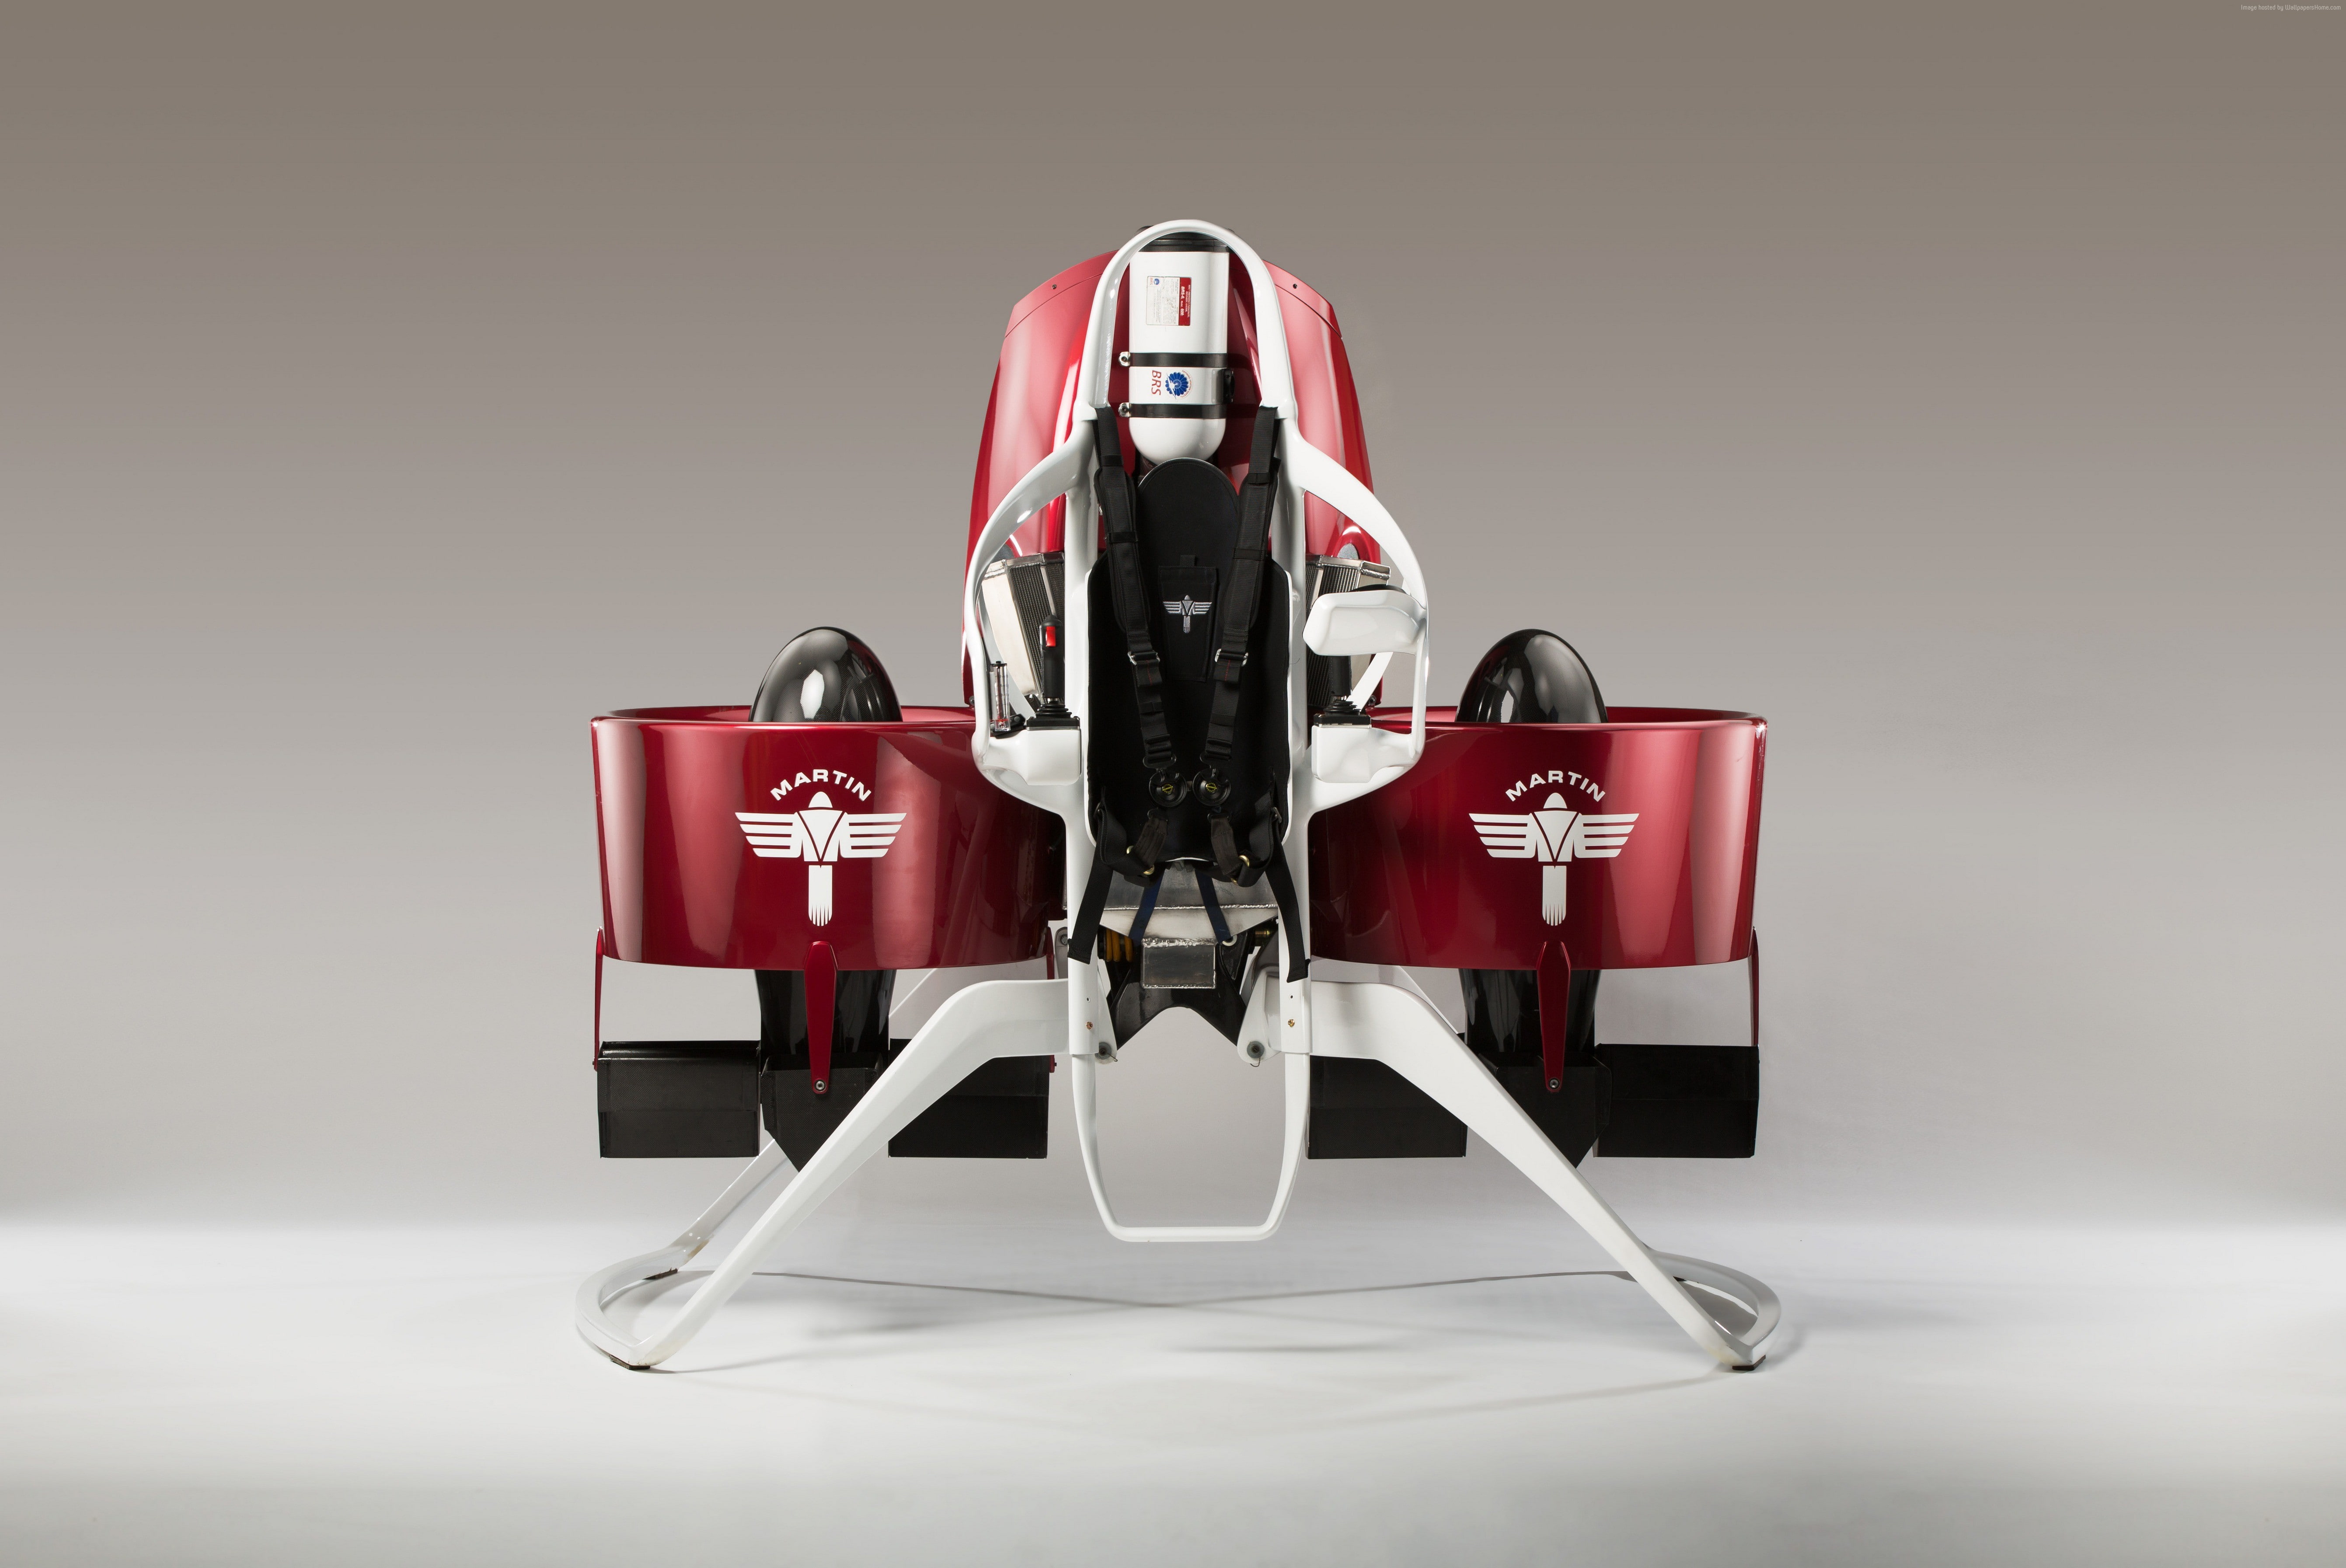 jetpack, Martin Aircraft, IPO, one-man, review, vehicle, limited edition